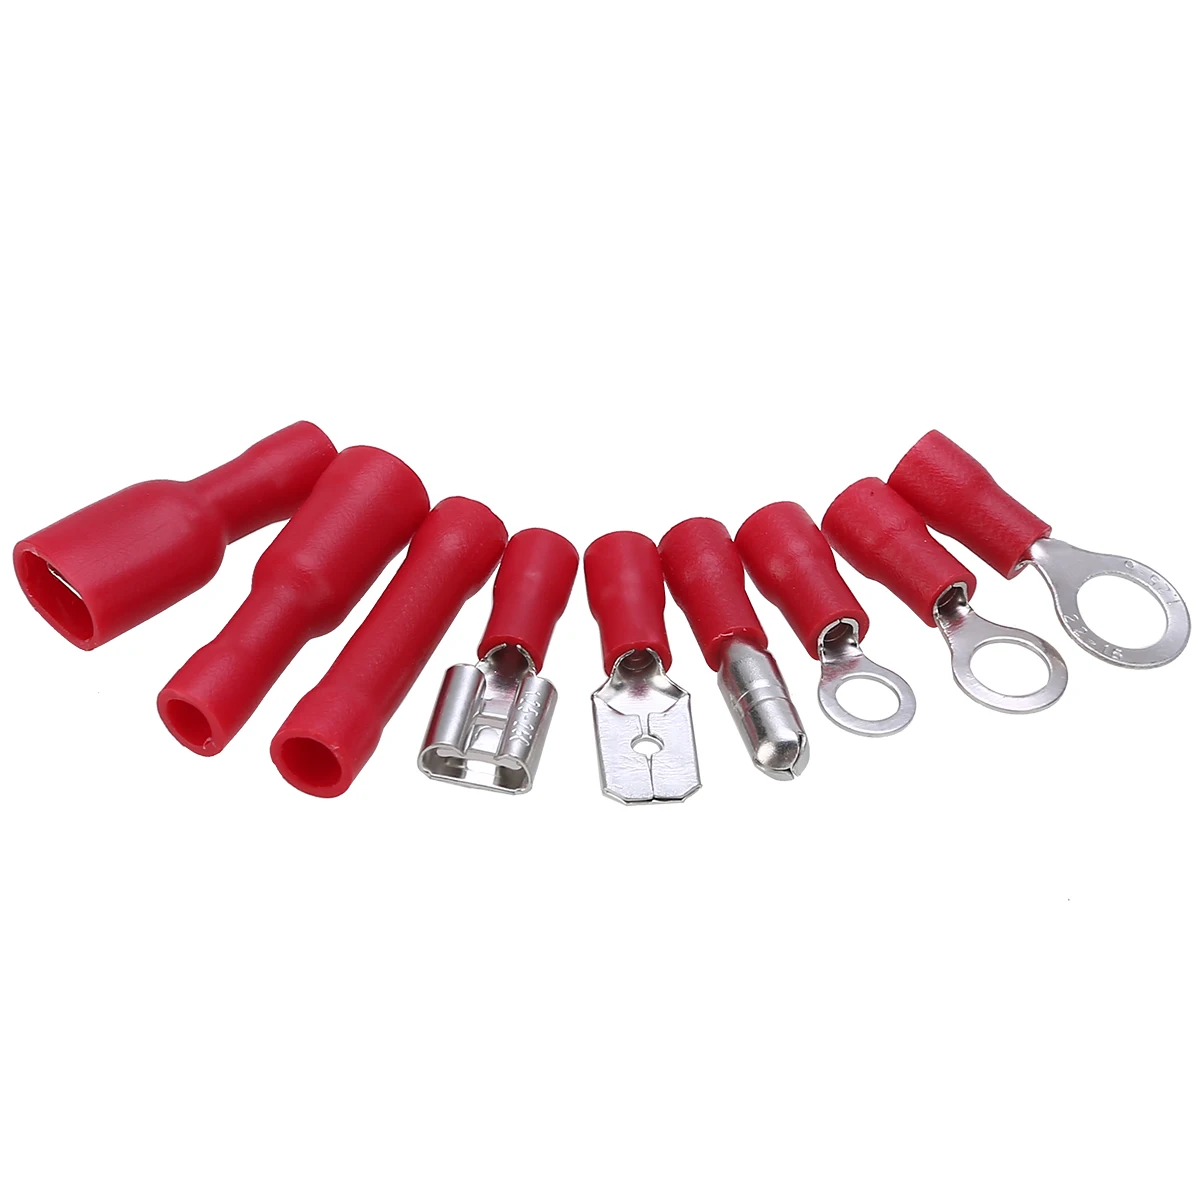 450pcs Cable Lugs Flat Plug Crimp Terminal Spade Ring Insulated Electrical Wire Connector with Crimping Plier Tool Mixed Box Kit